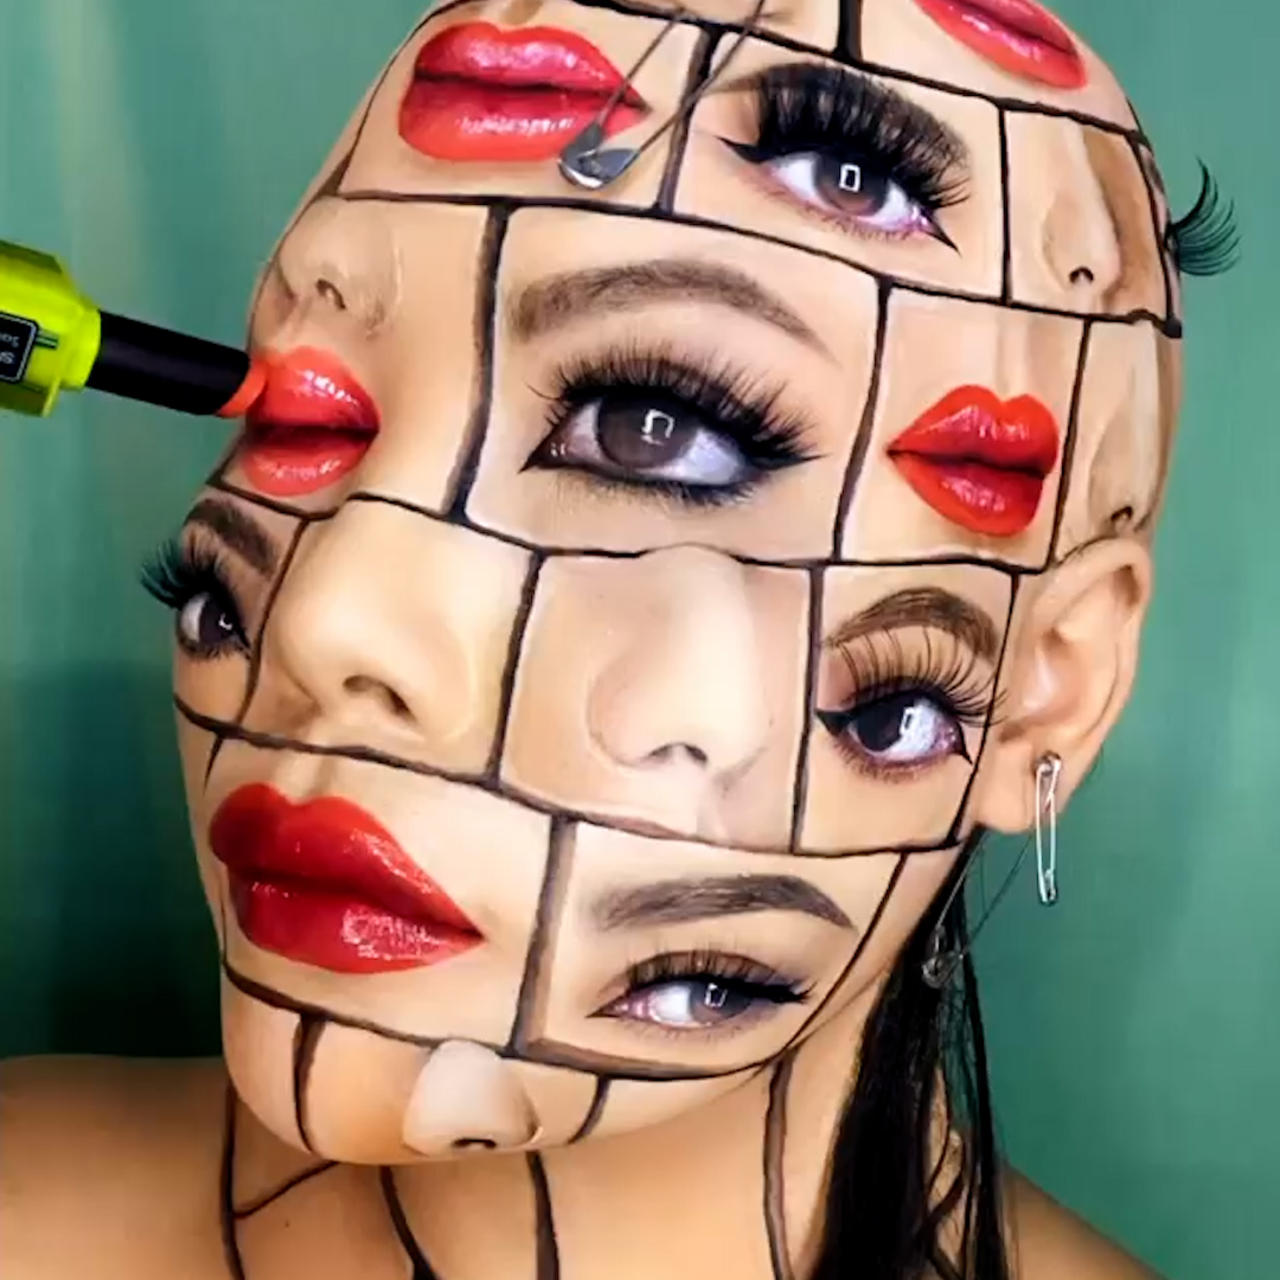 These looks by makeup artist Mimi Choi will leave you feeling nightmarish